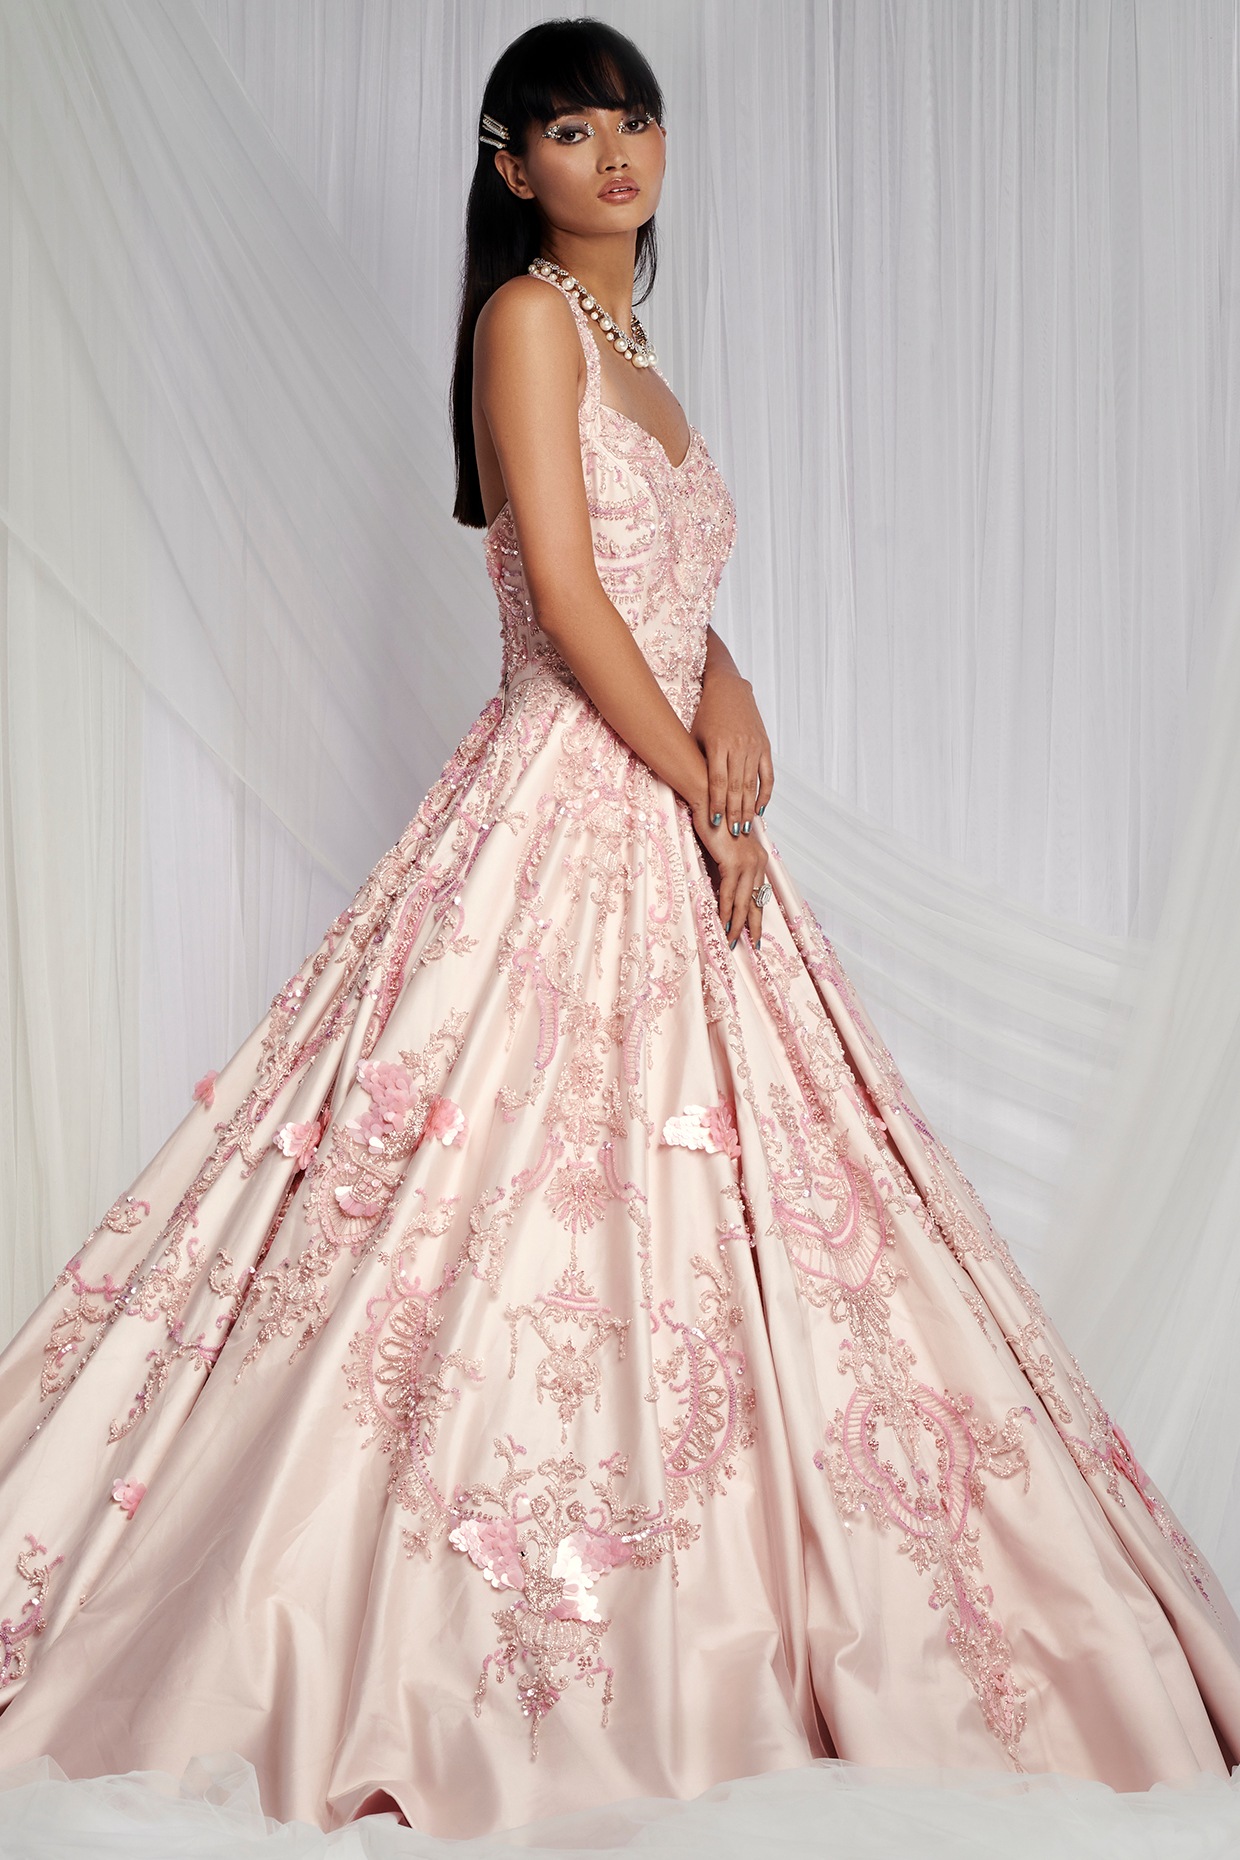 Blush Pink Princess Ball Gown Line A Wedding Dress With Illusion 3/4  Sleeves, Lace Appliques, Tulle Fabric, Train, And Peplum Colored Bridal  Goggles From Weddingfactory, $227.14 | DHgate.Com